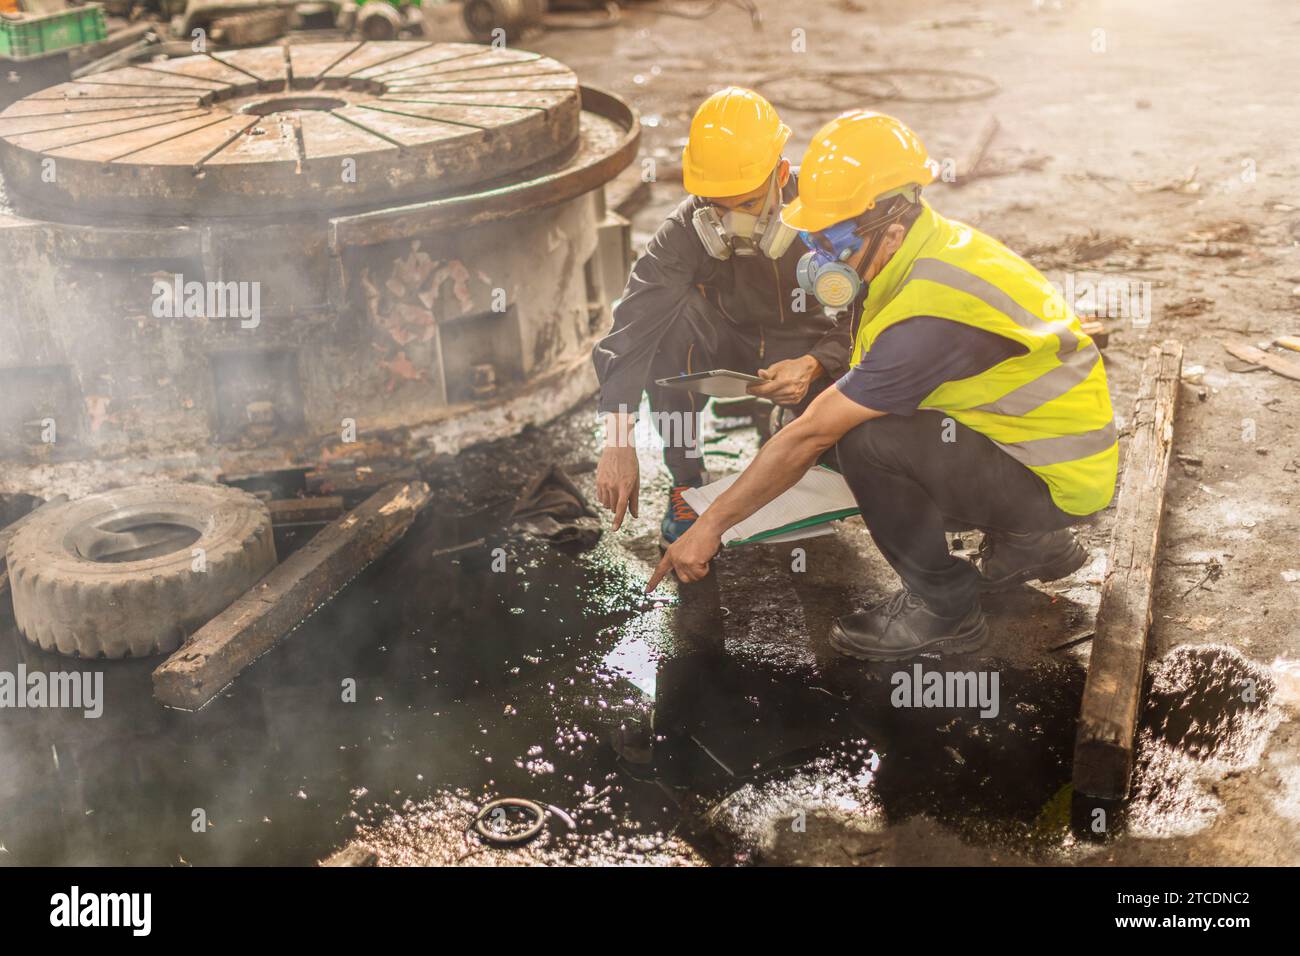 Chemical toxic liquid oil gas leak danger to environment impacts investigation team working site rescue and examination with safety Stock Photo